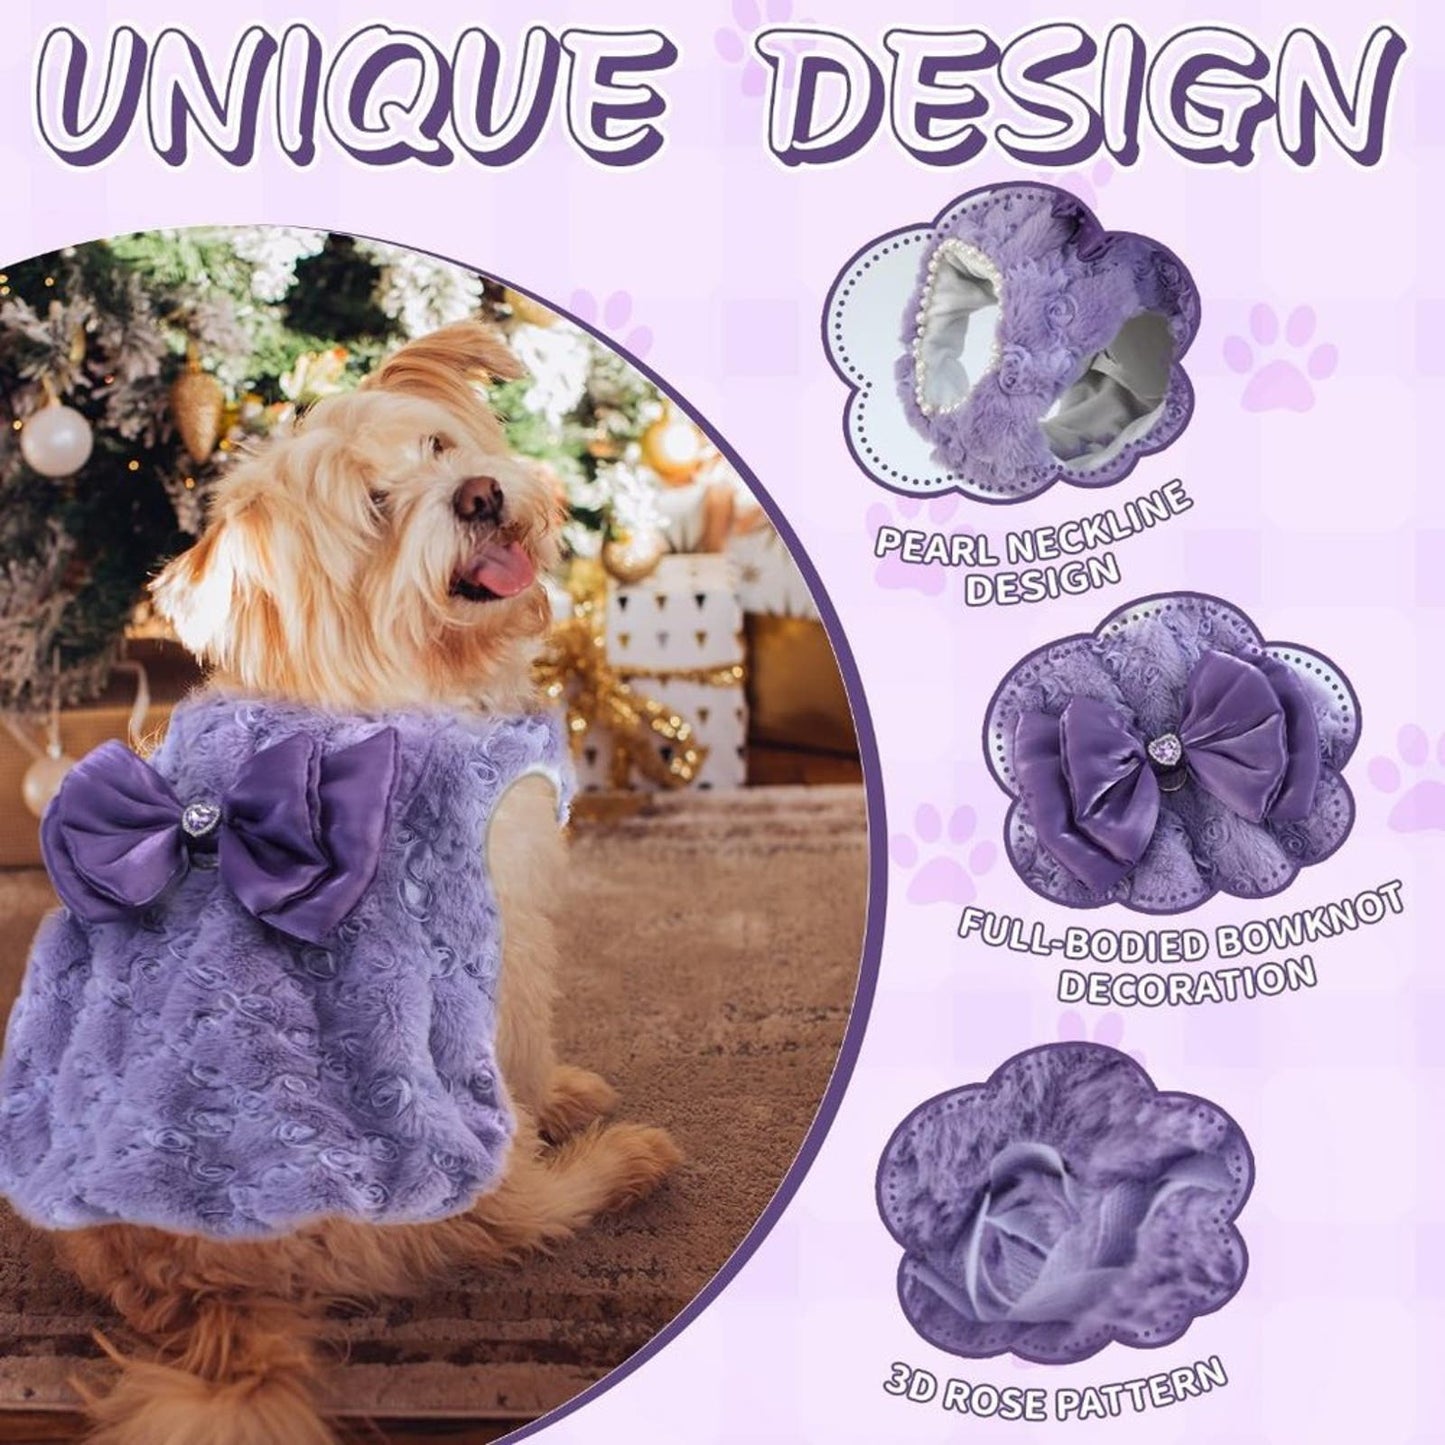 Couner Dog Sweater Dress for Dogs Girl,Faux Fur Cat Sweater Purple LG